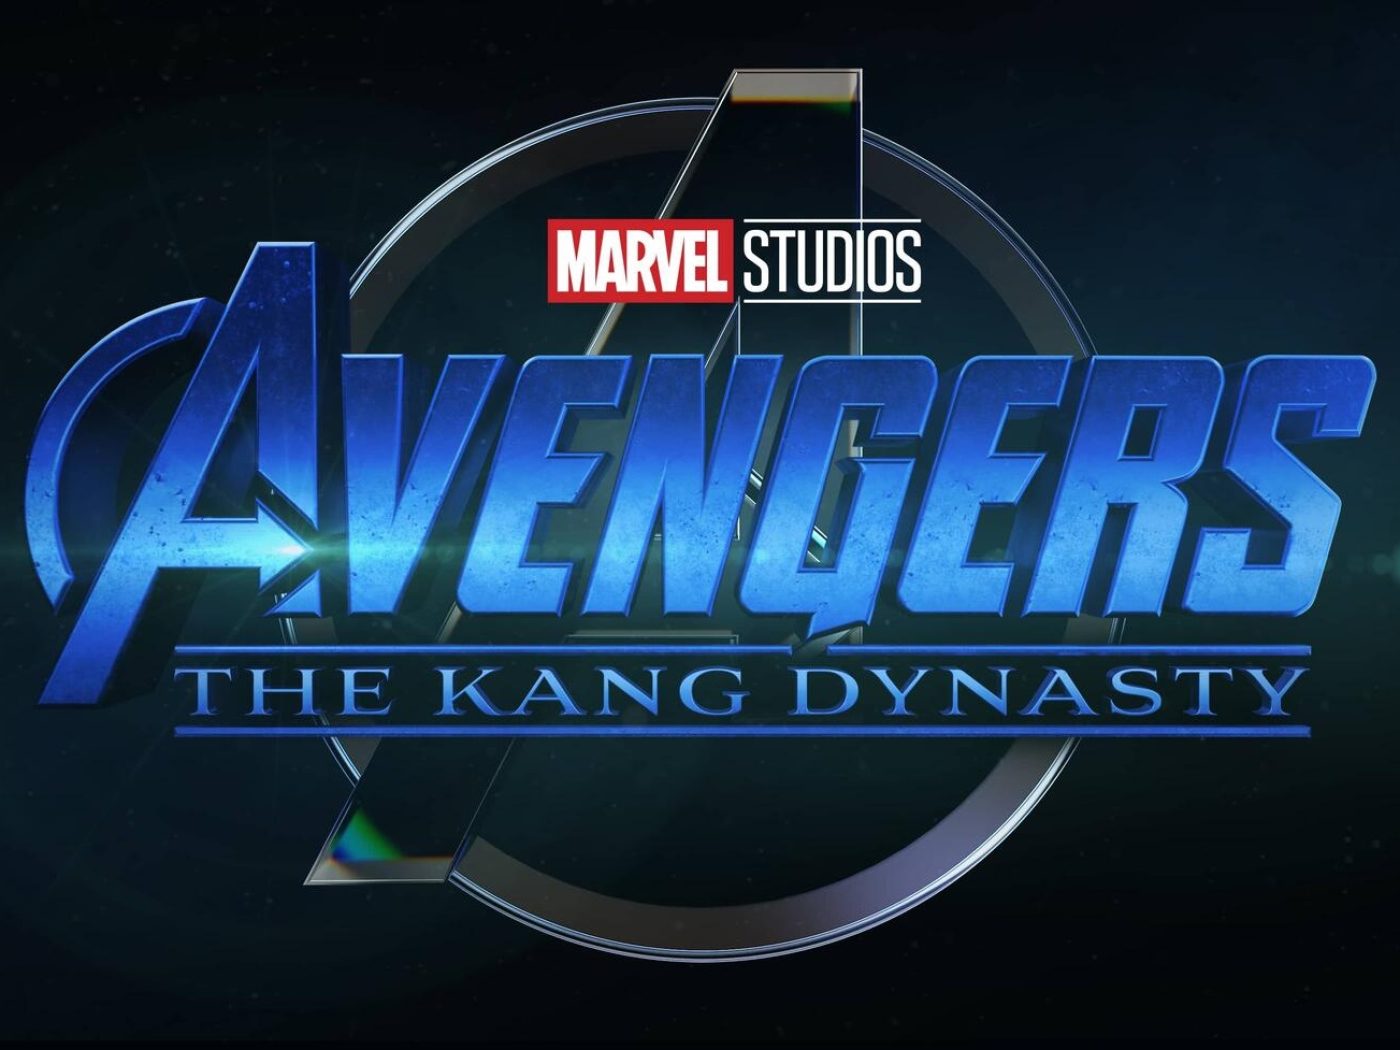 Avengers: The Kang Dynasty Theories + Phase 5 & 6 Connections Explained -  Hype MY